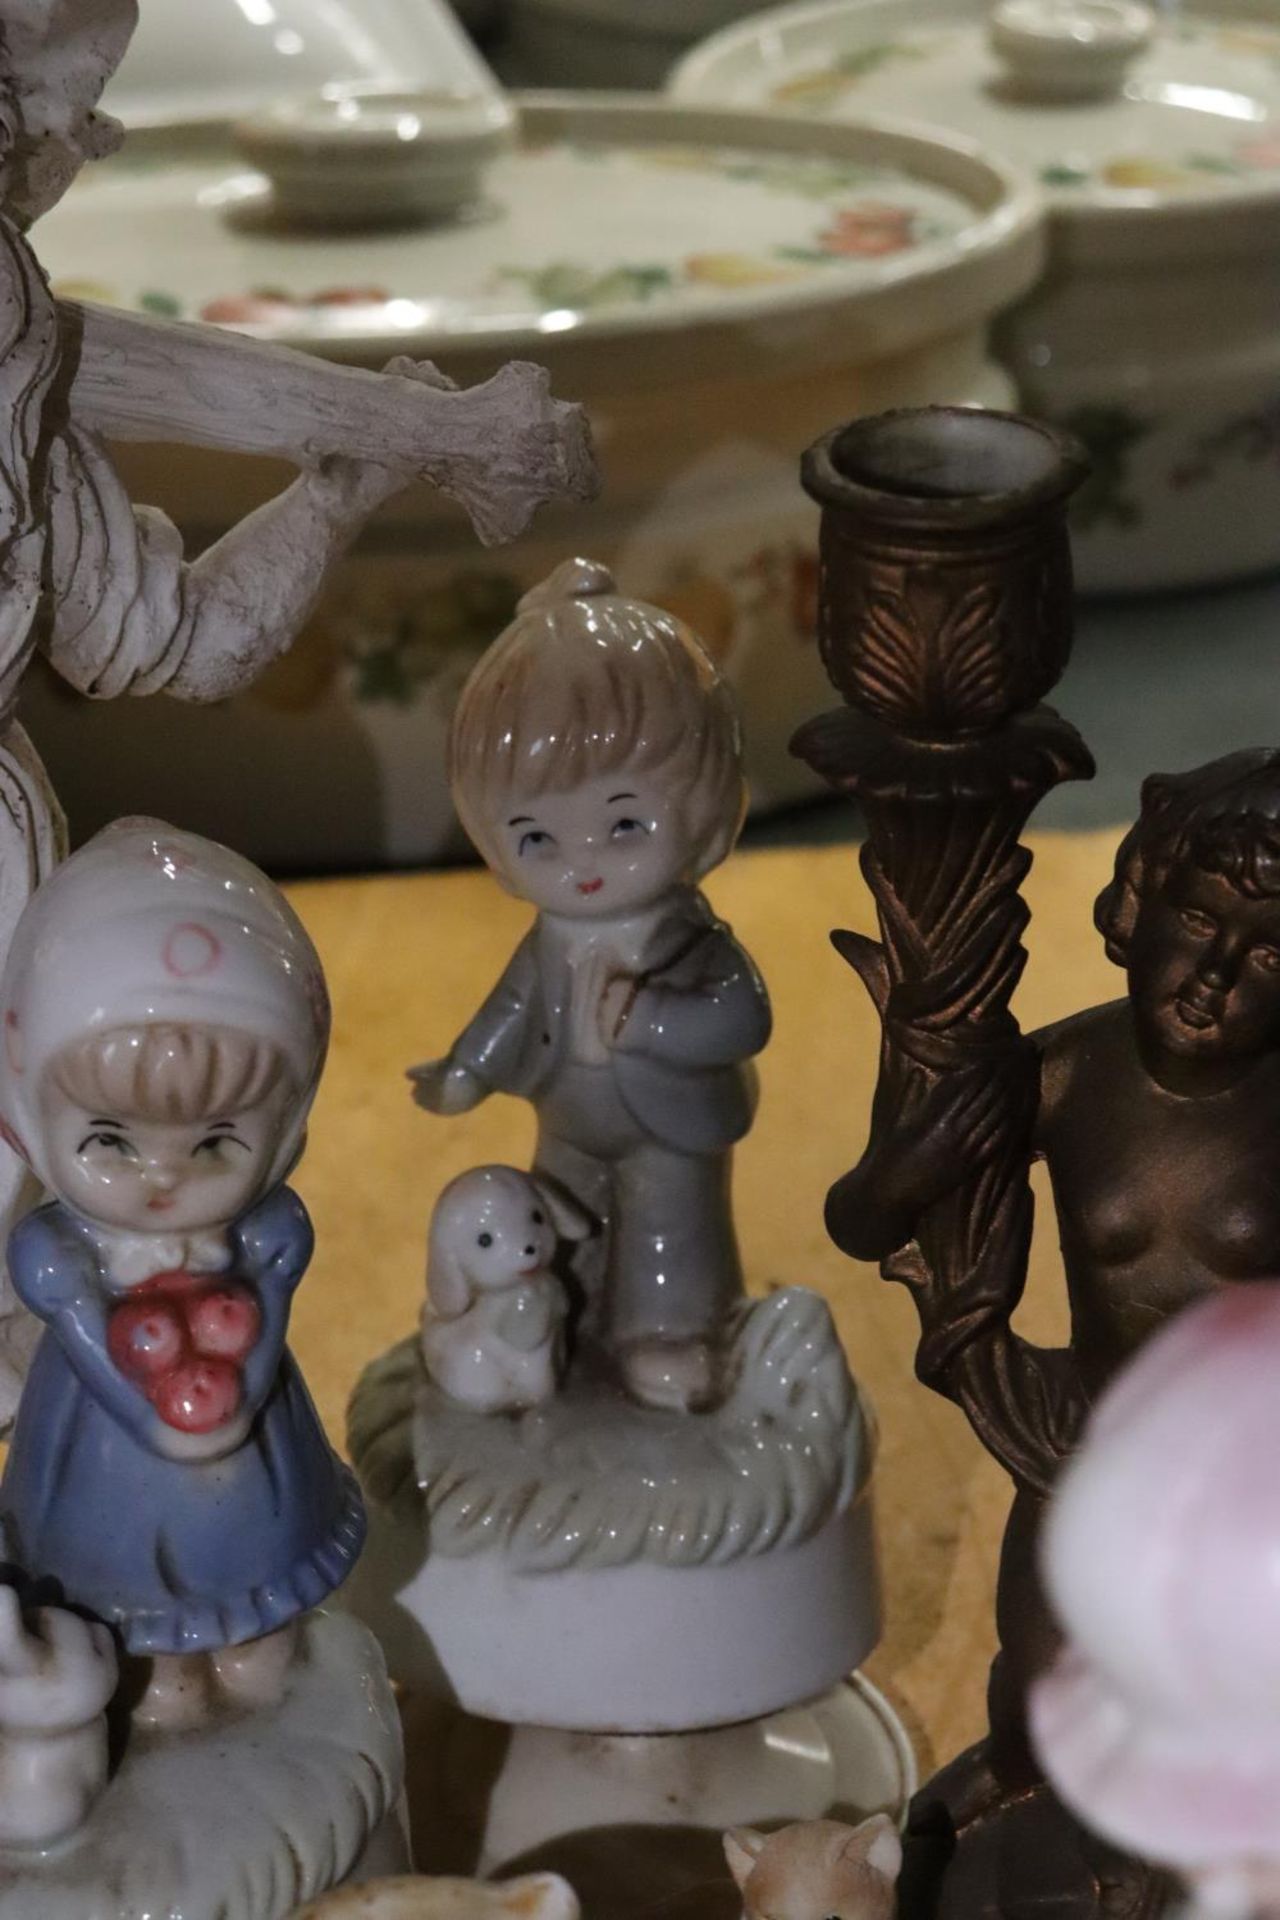 A COLECTION OF CERAMIC ITEMS TO INCLUDE WIND UP BOY AND GIRL, OWLS, CATS, BIRDS ETC - Image 7 of 7